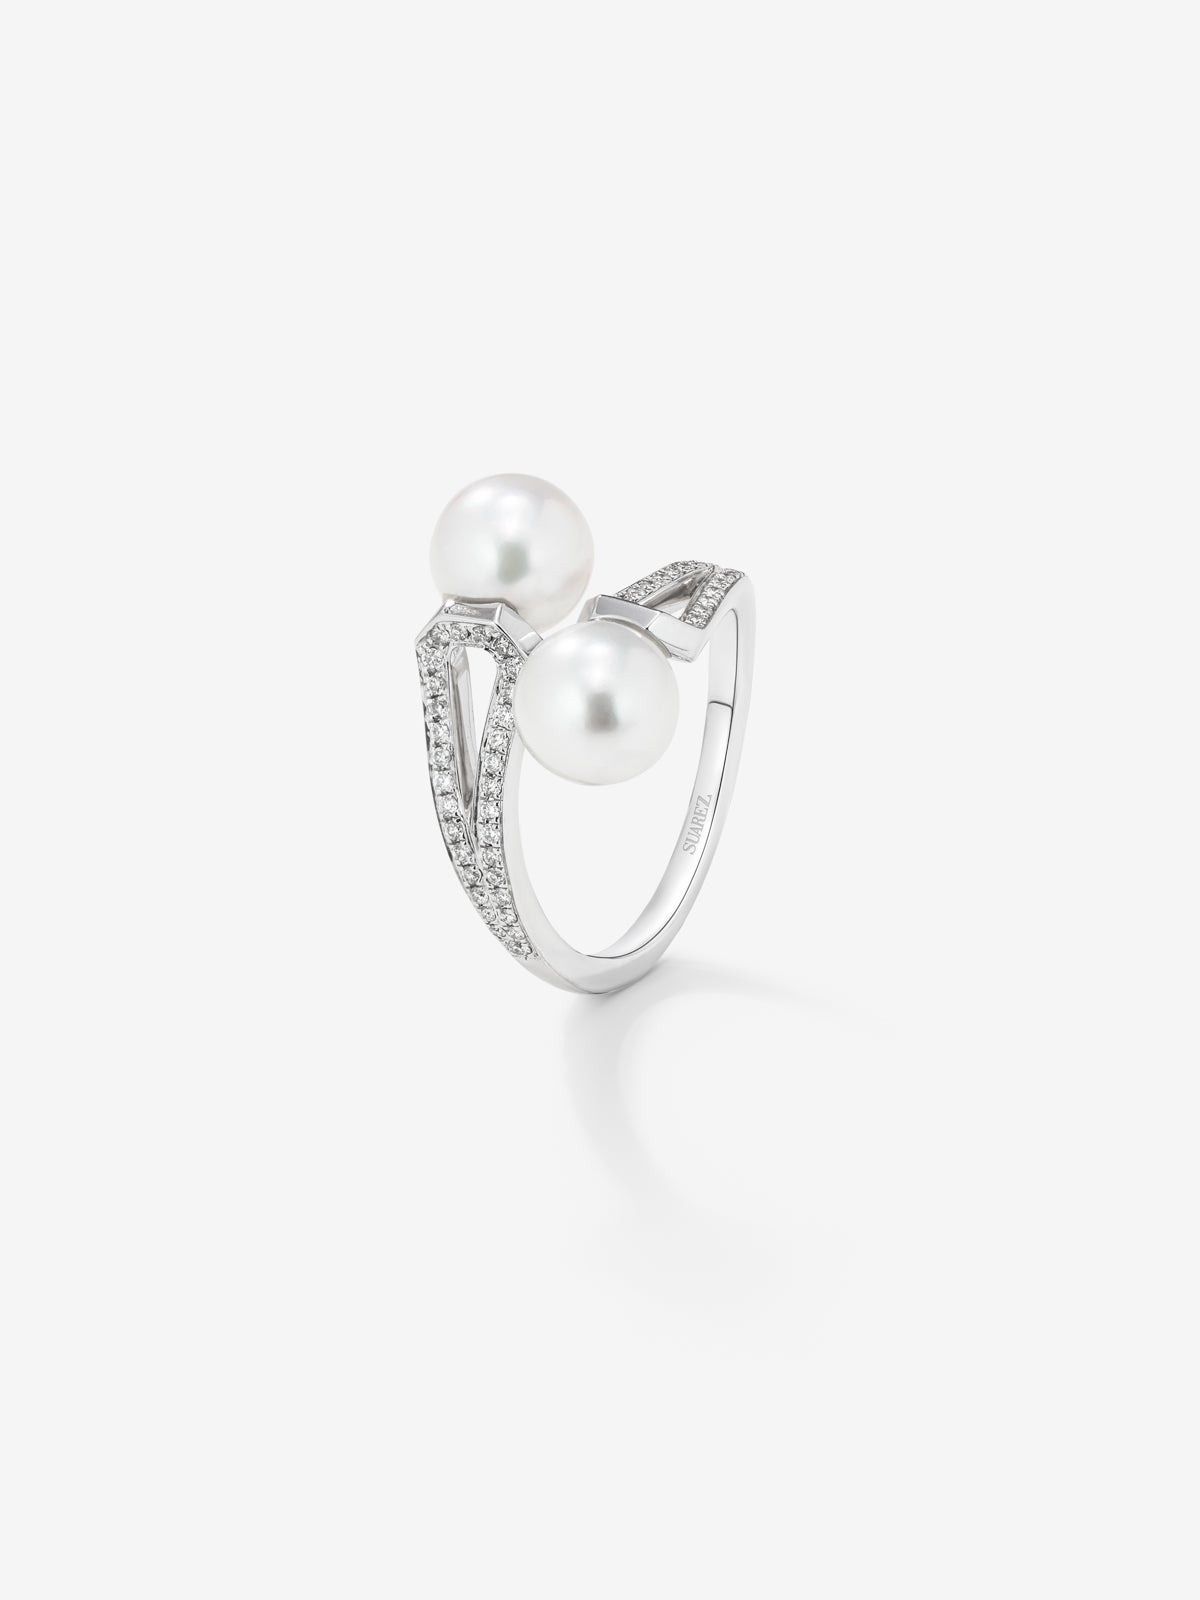 You and me ring in 18K white gold with 2 7mm Akoya pearls and 62 brilliant-cut diamonds with a total of 0.22 cts